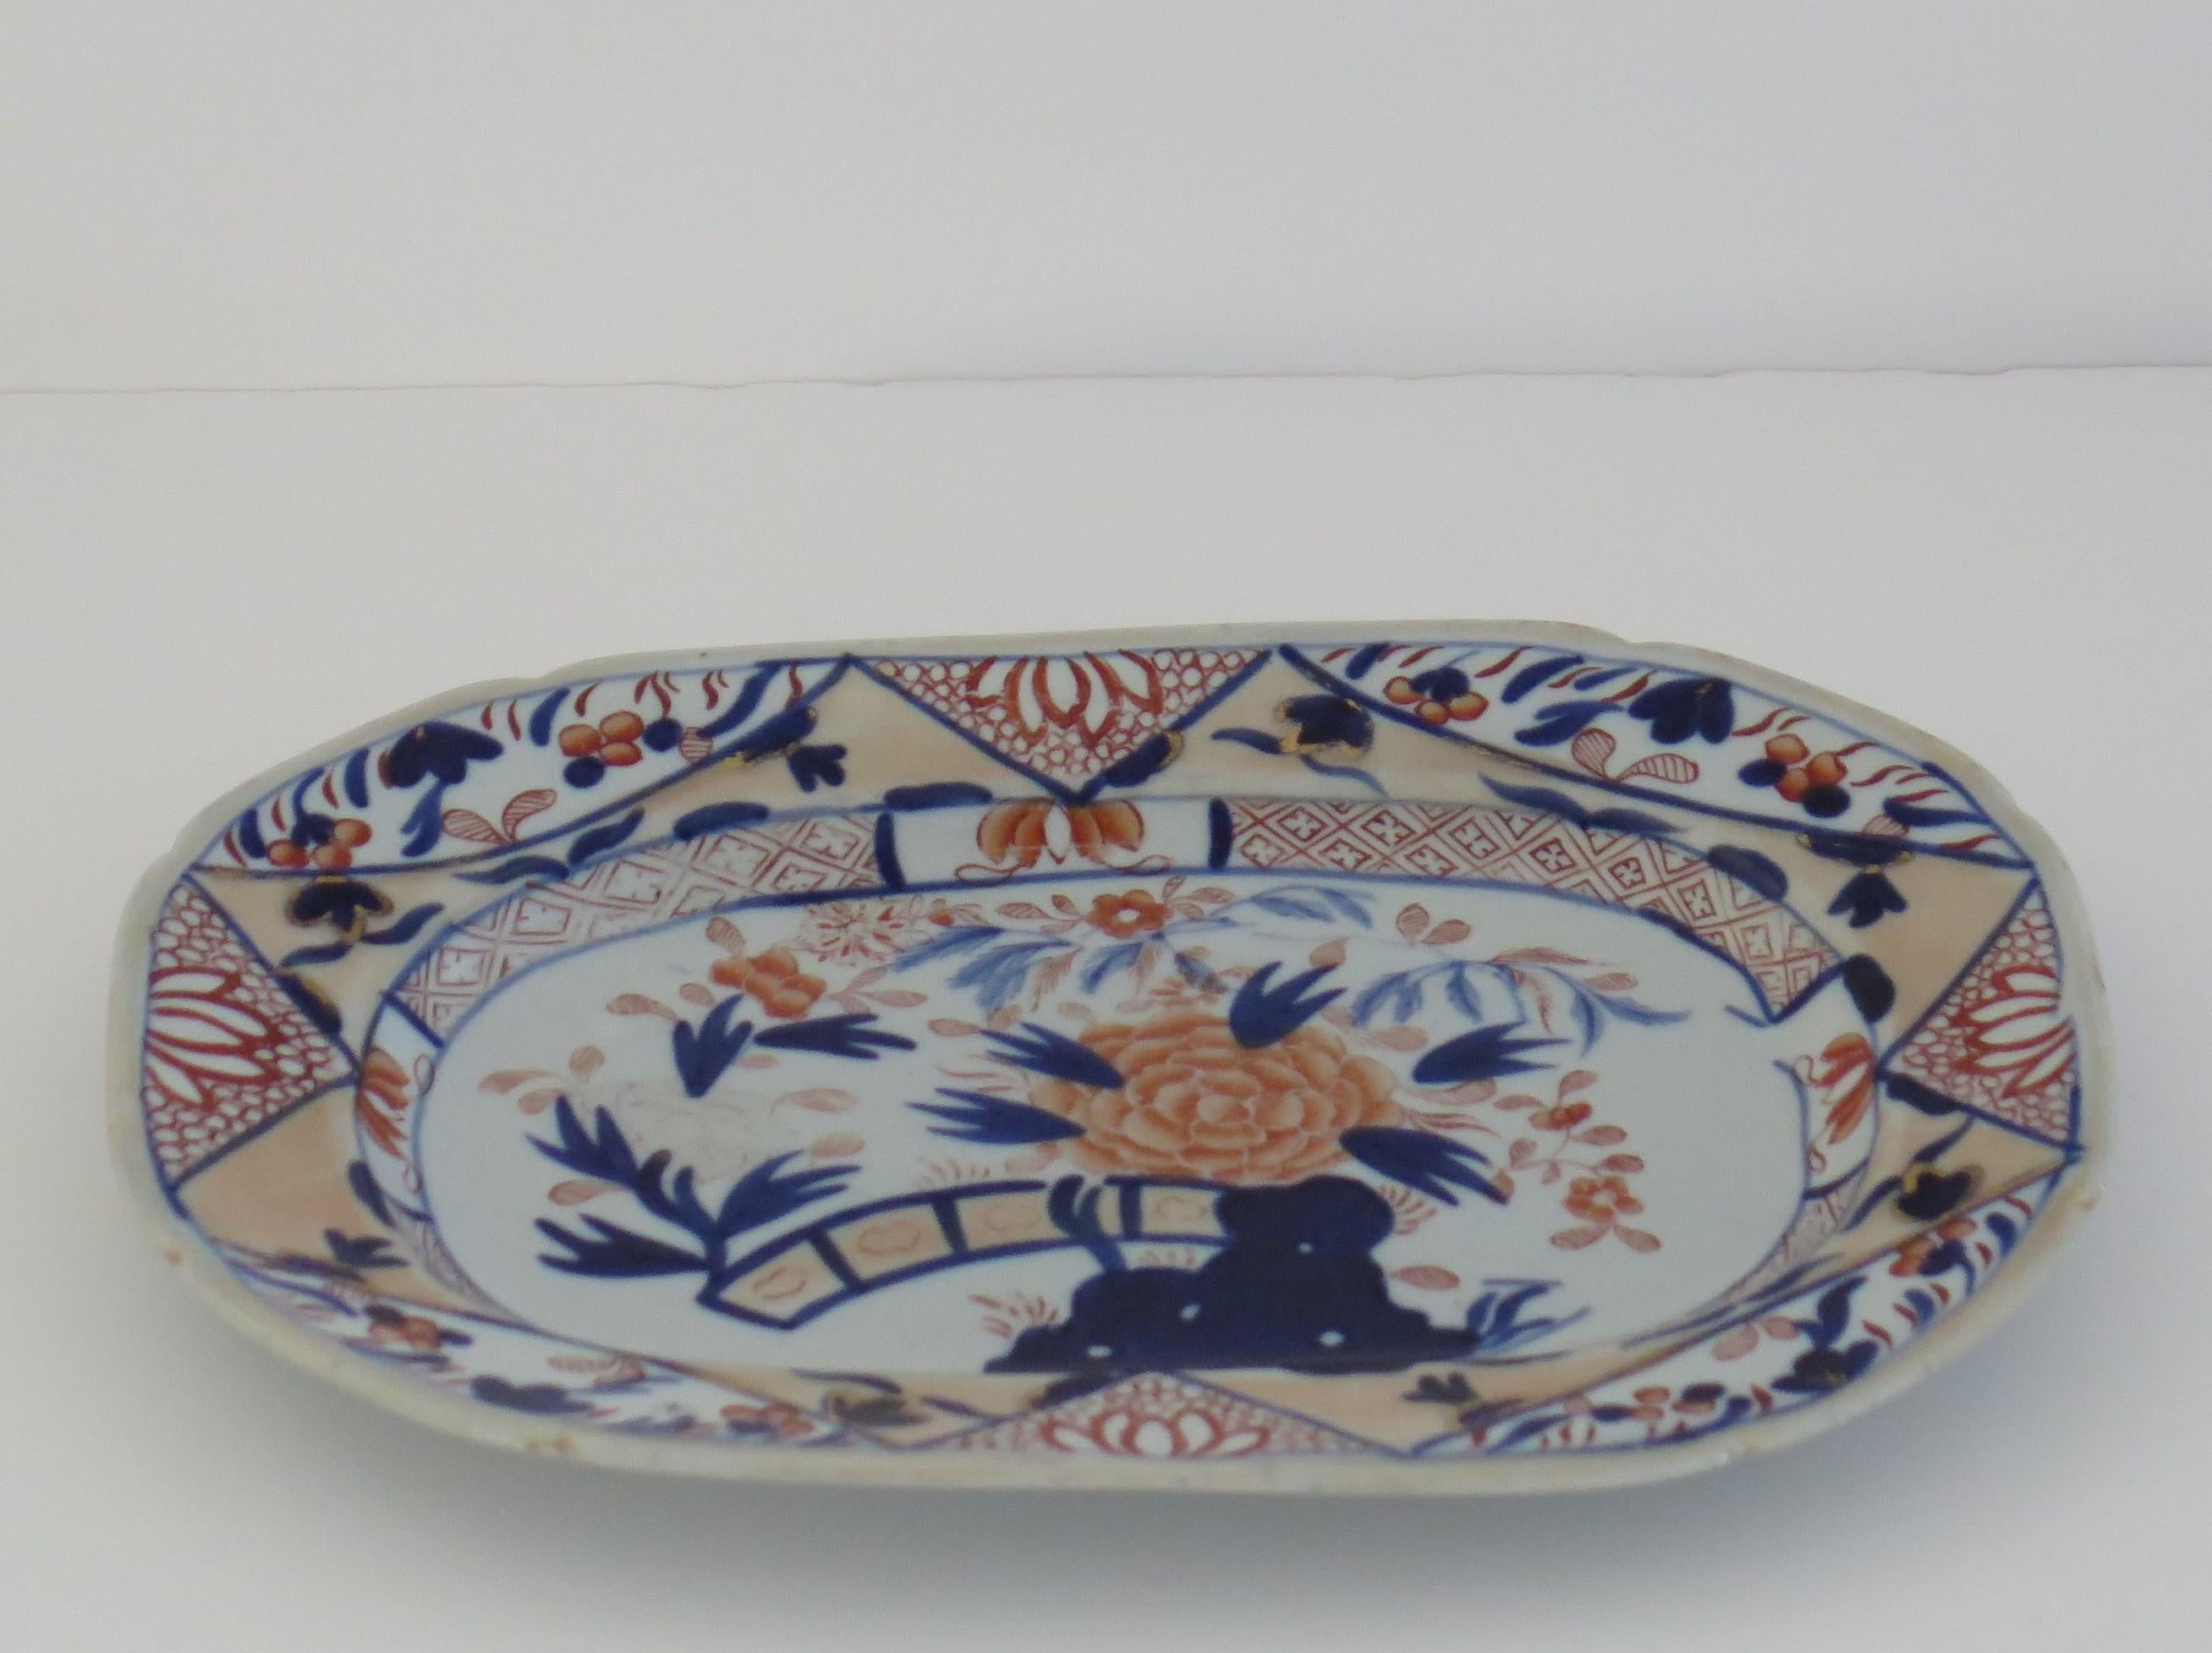 Hand-Painted Mason's Ironstone Serving Platter in Fence, Rock & Blue Willow pattern, Ca 1820